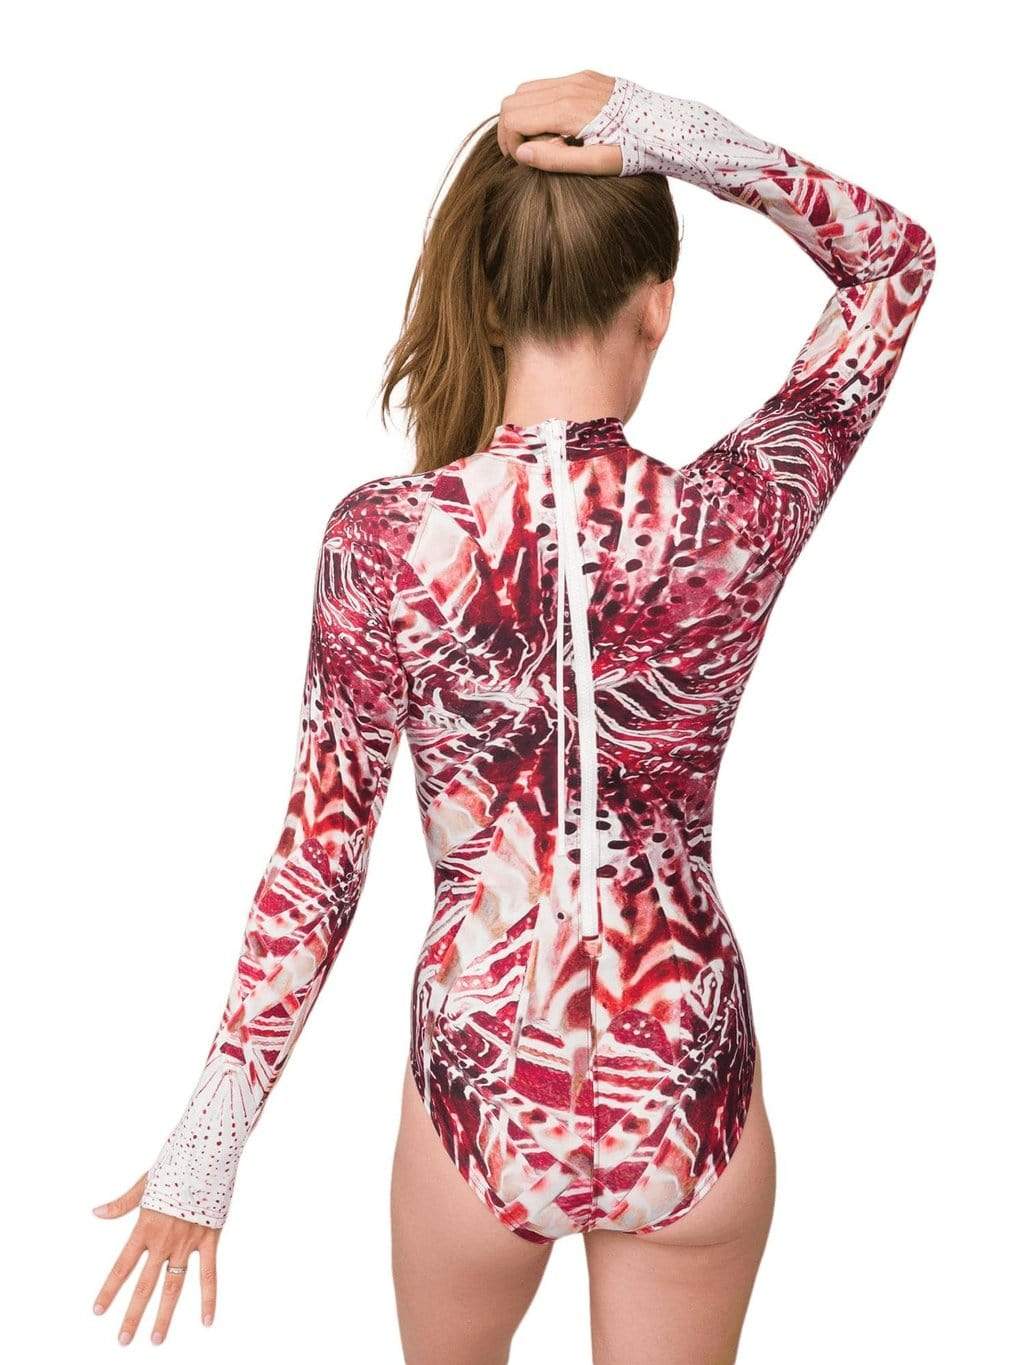  Womens Long Sleeve Rash Guard UV Protection Zipper Printed  Surfing One Piece Swimsuit Bathing Suit For Women Lion XL